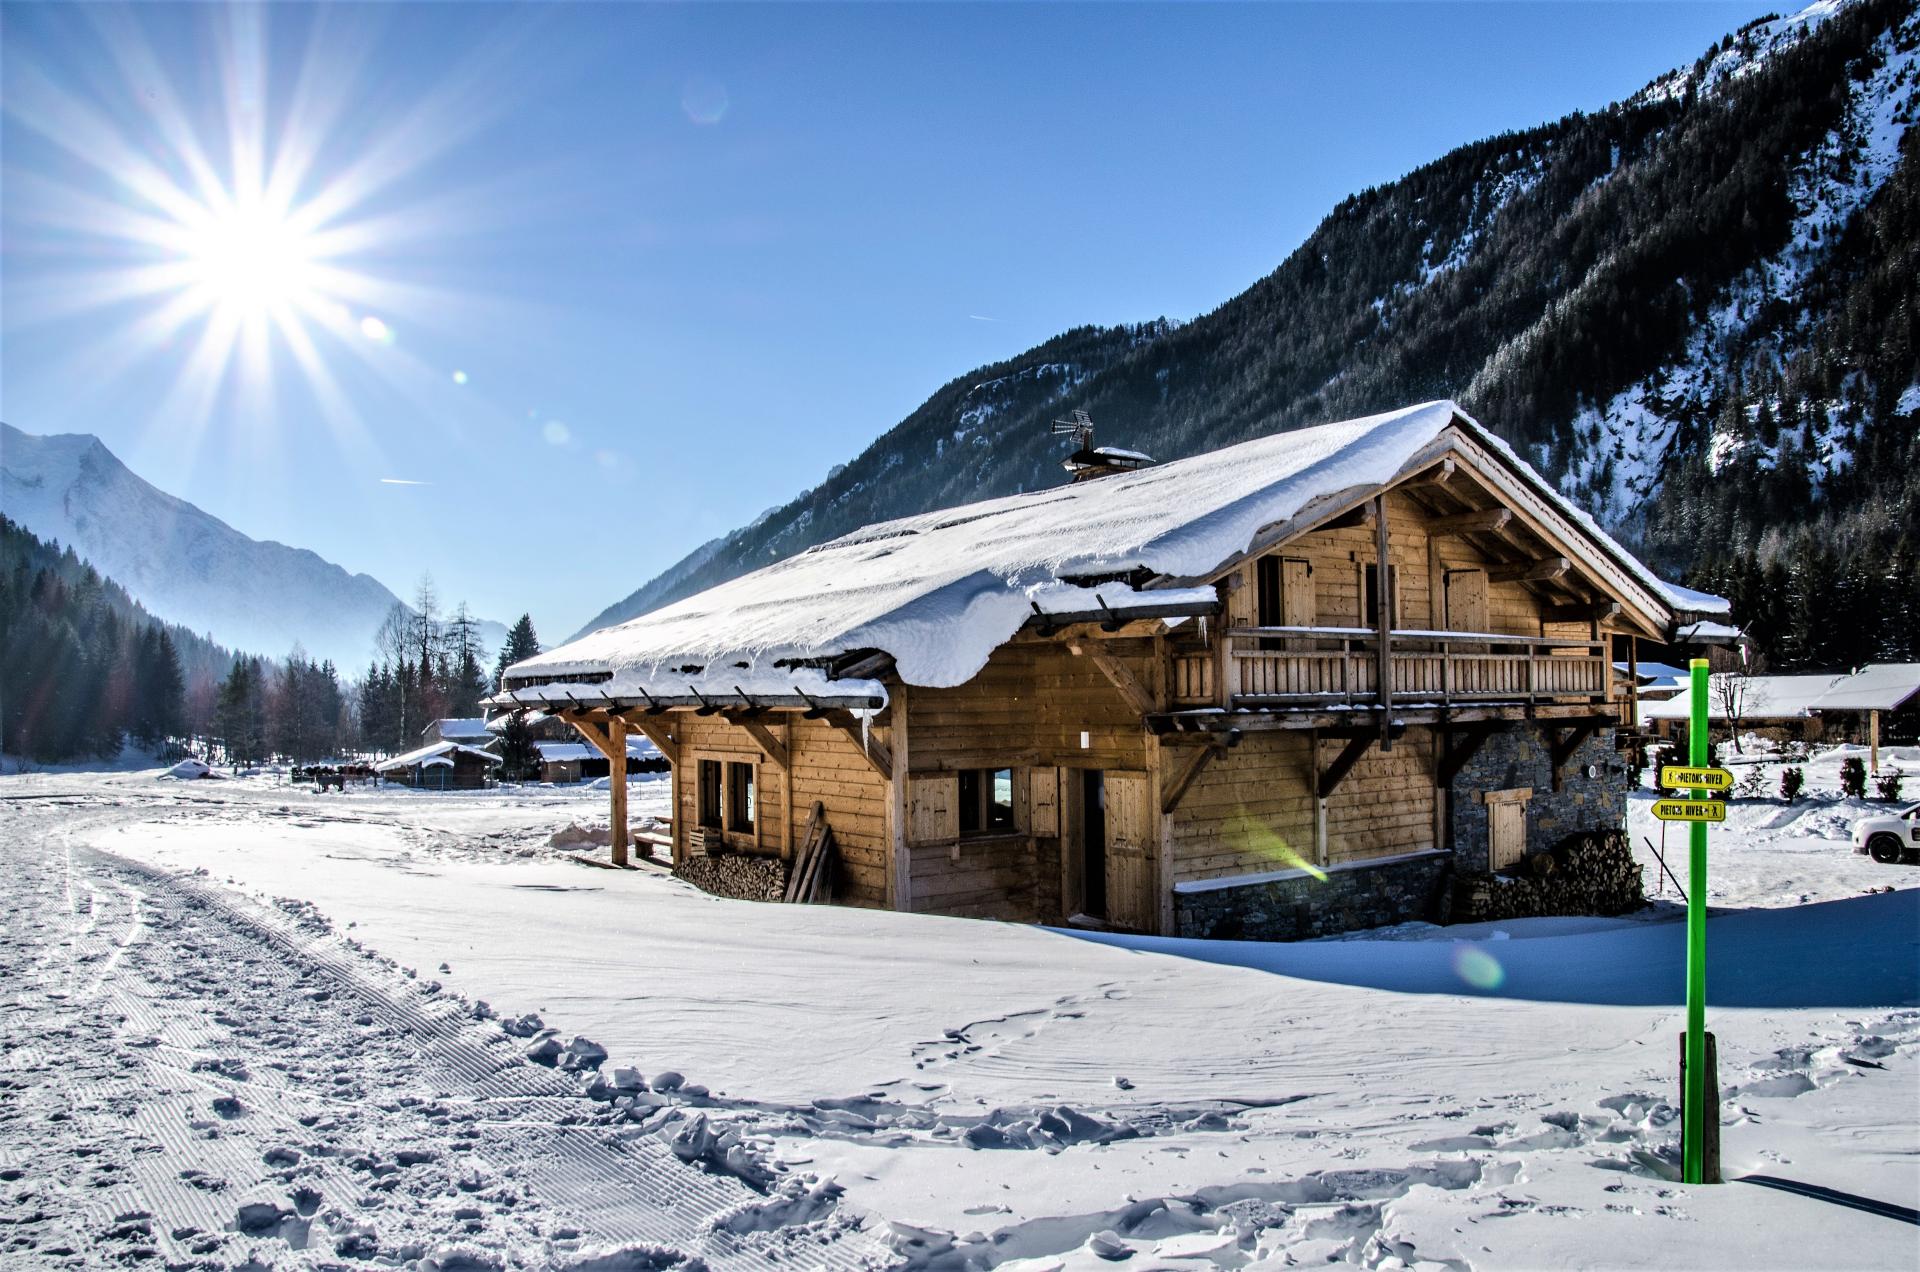 CHALET DES GRANDS MONTETS IN CHAMONIX, FRENCH ALPS